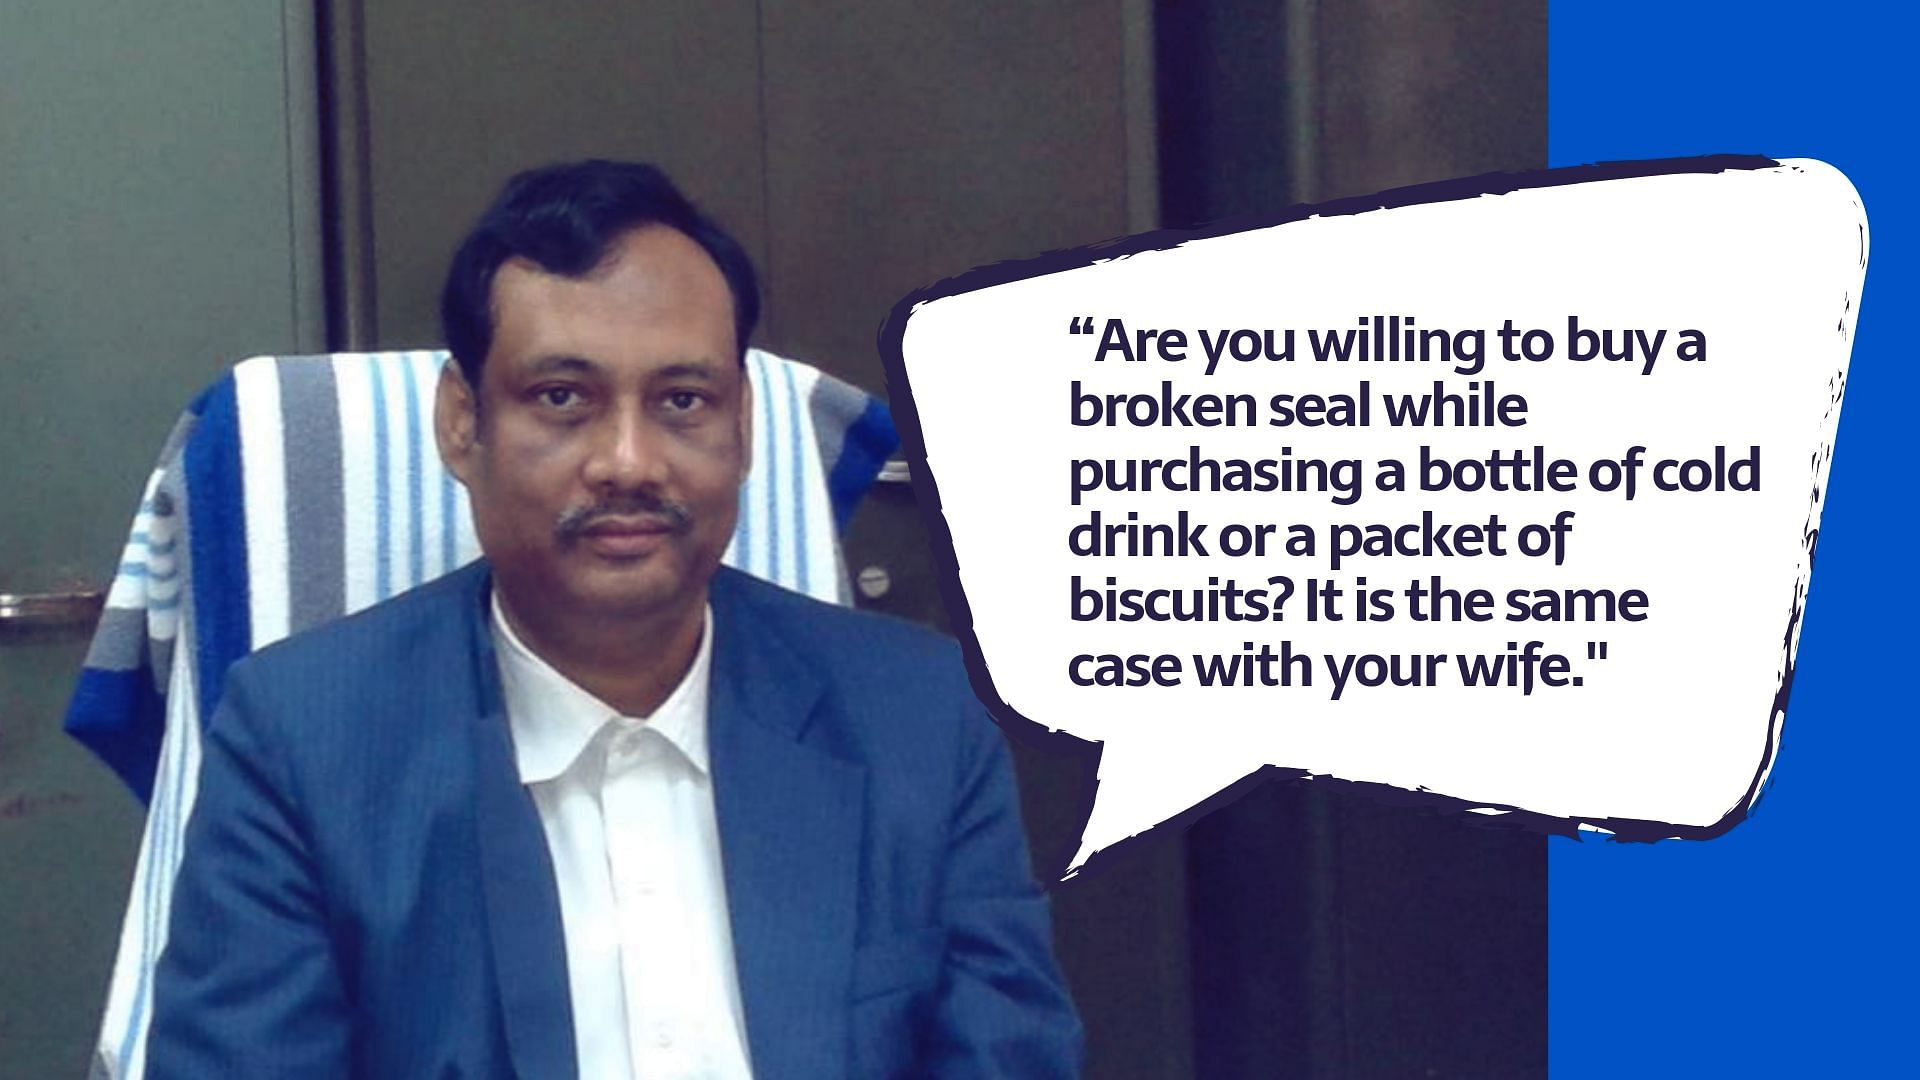 Kanak Sarkar, a Jadavpur University professor has received massive backlash for a Facebook post comparing the virginity of a woman with the seal of a “cold drink bottle or a packet of biscuits.”